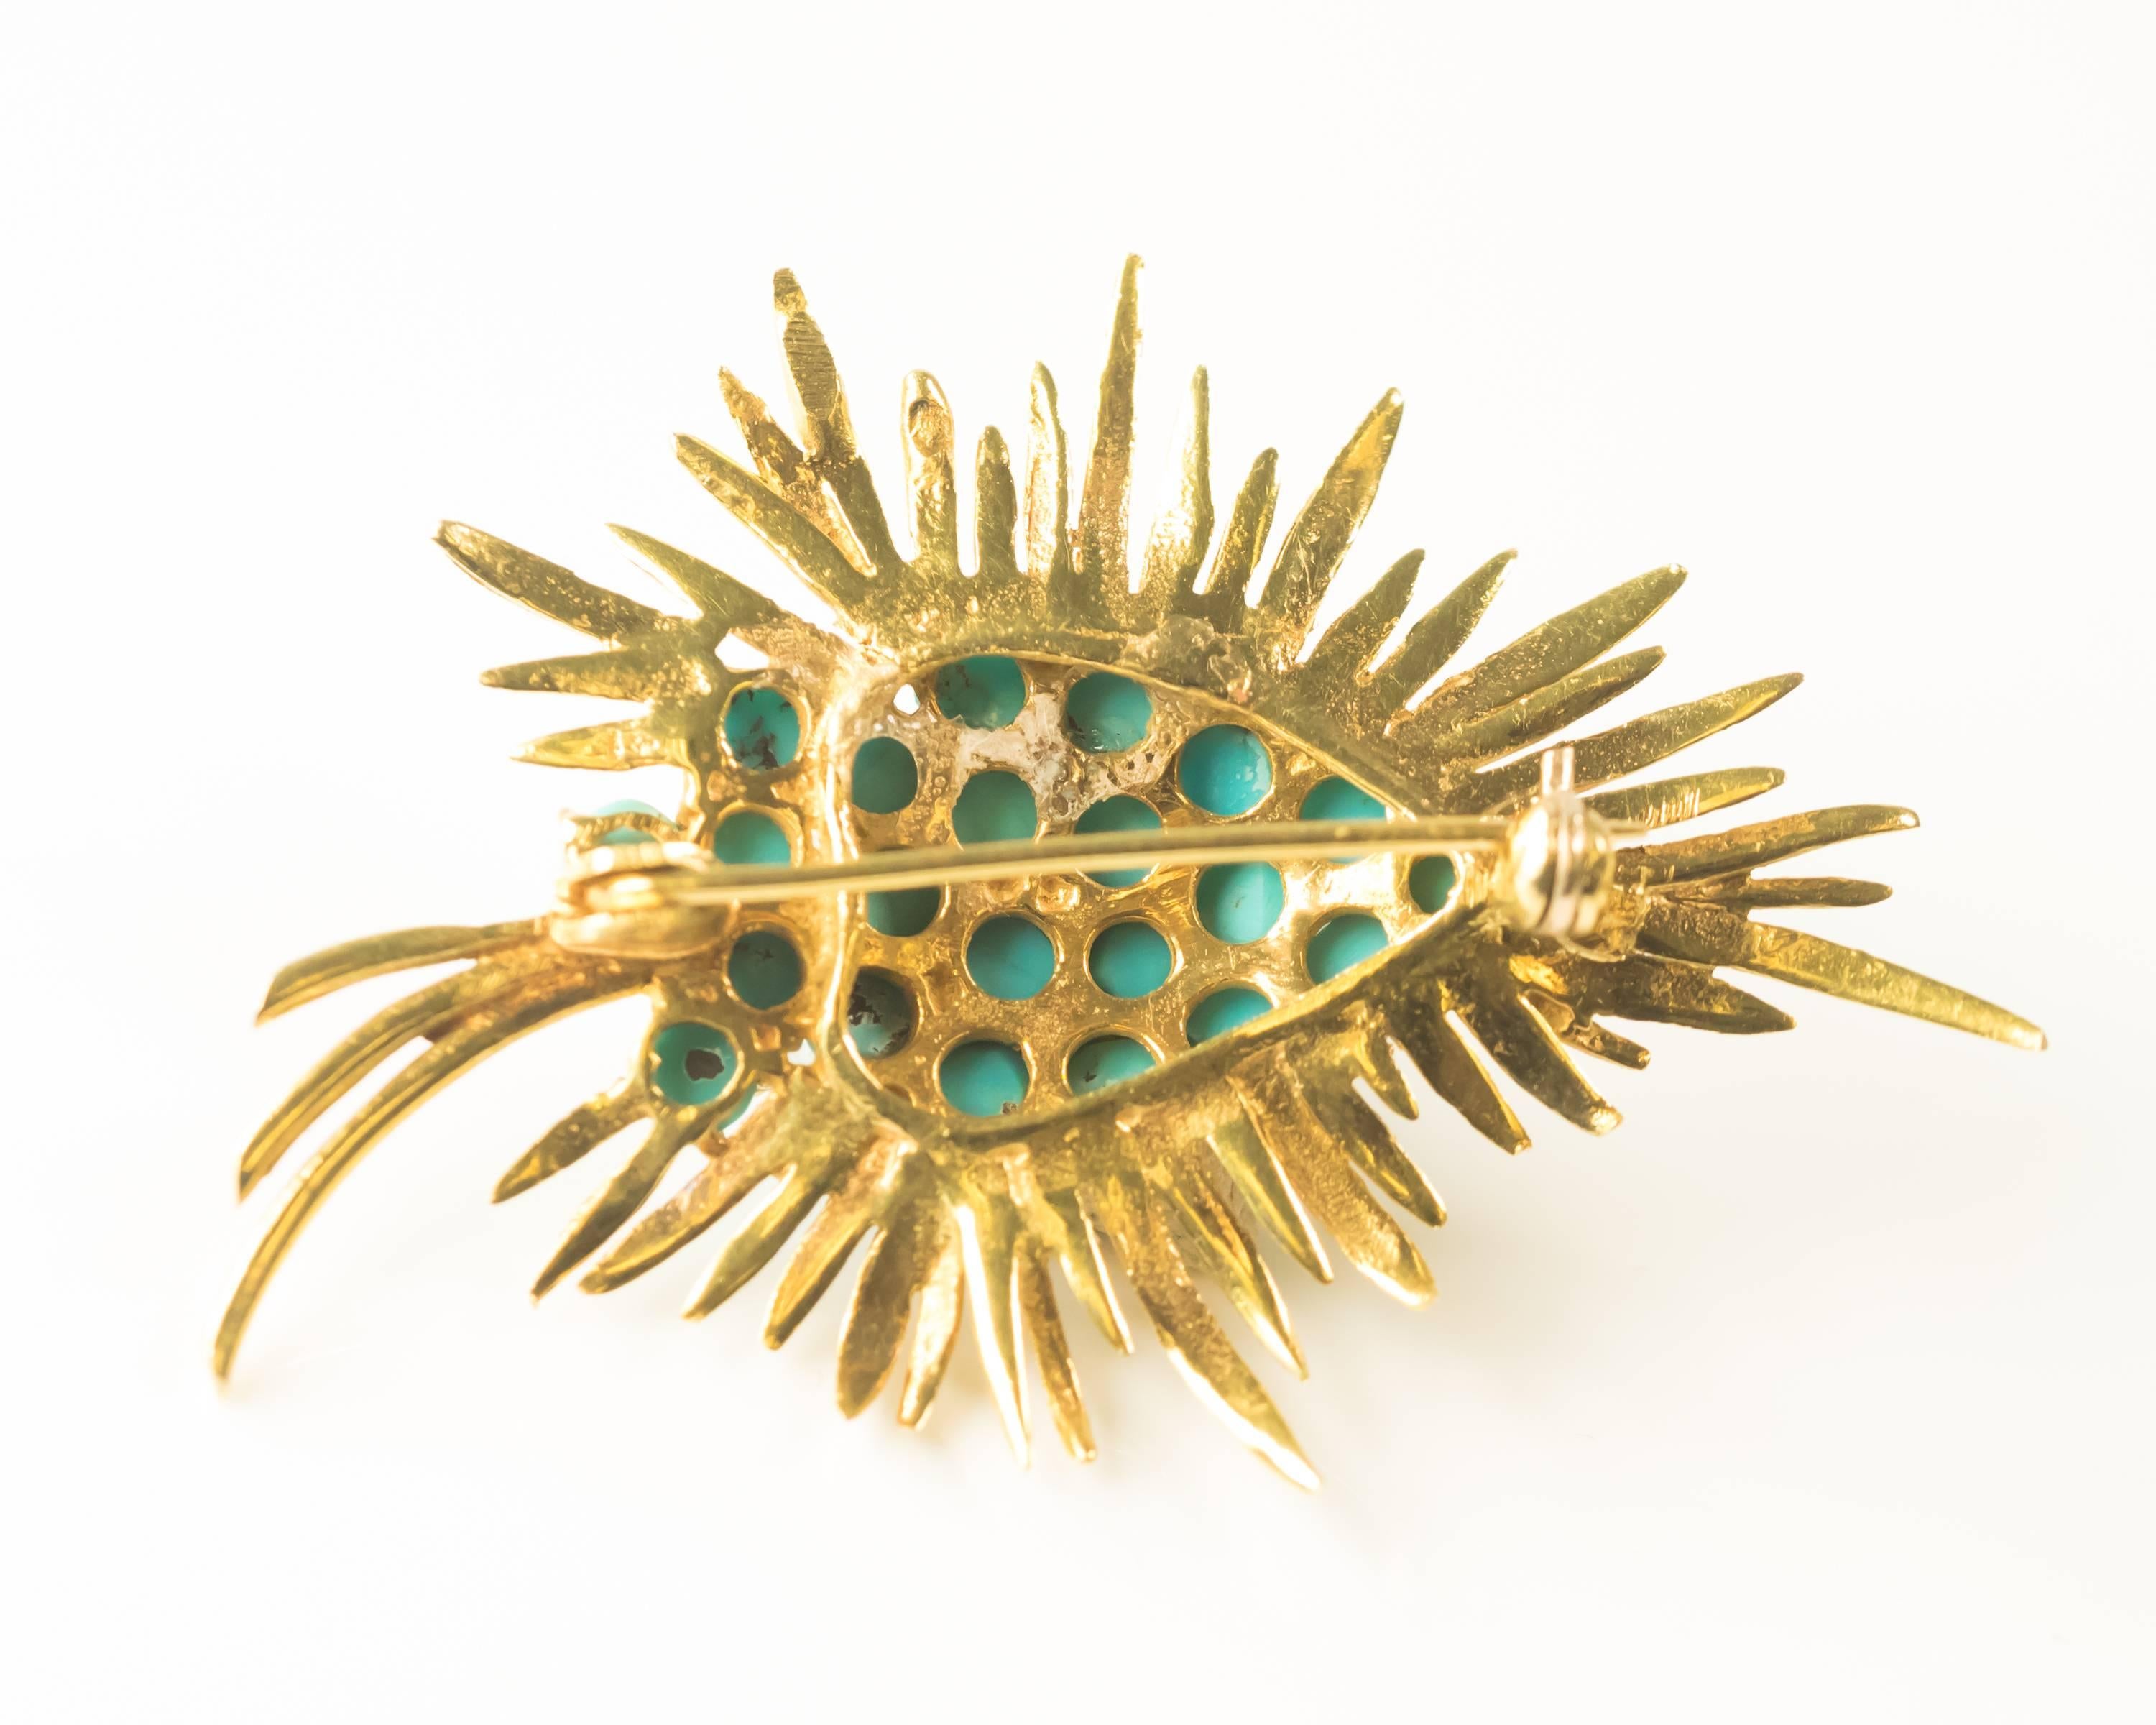 1980s Abstract Leaf Brooch - 18 Karat Yellow Gold, Turquoise

Features a cluster of prong set Turquoise spheres surrounded by 18 Karat Gold Rays. The Gold rays extend from the center of the brooch outward in all directions. Three slightly longer